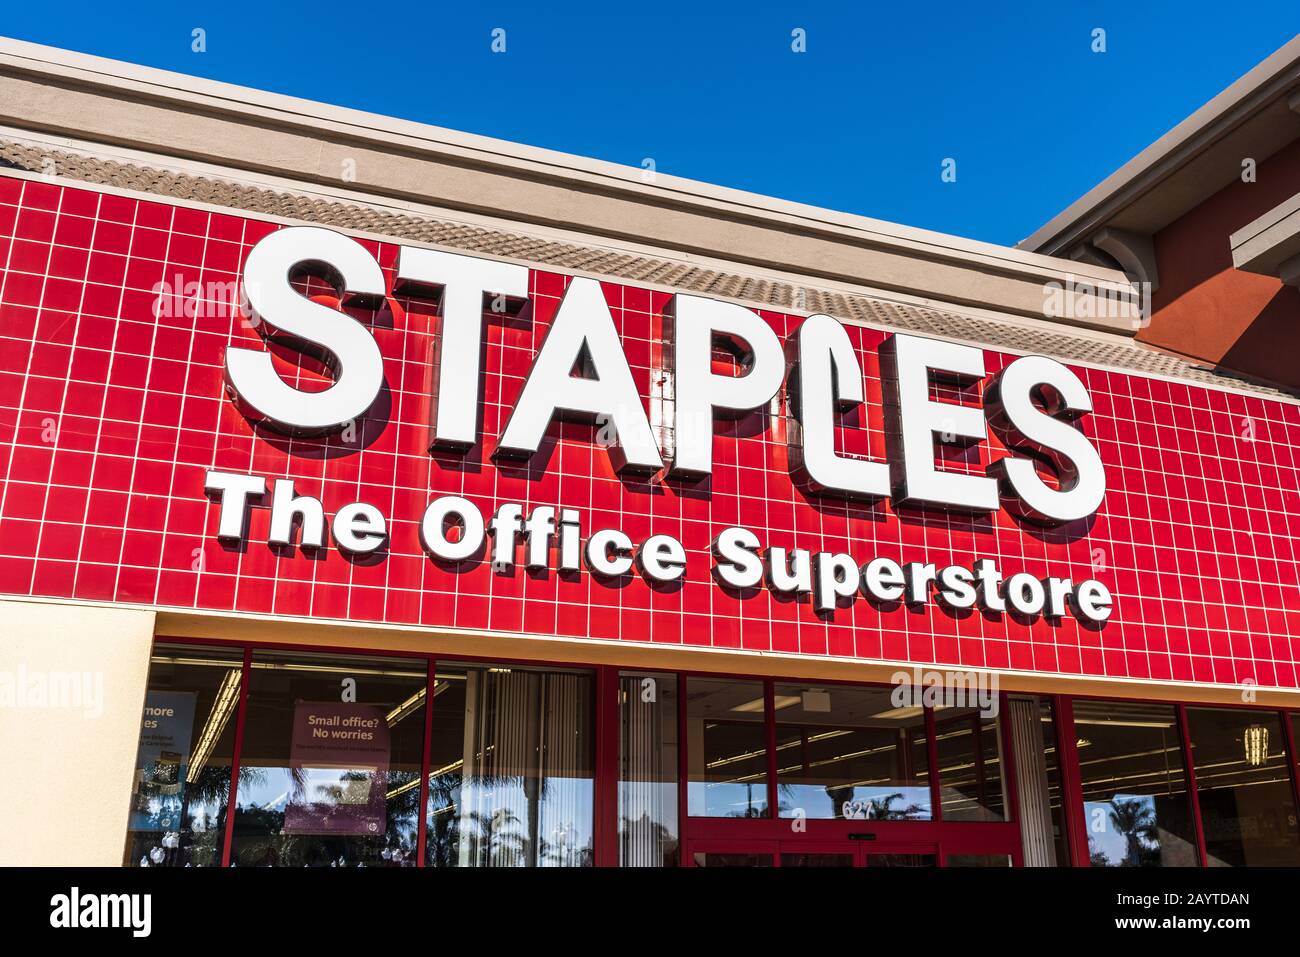 Feb 14, 2020 Milpitas / CA / USA - Staples, The office superstore sign above the entrance to one of their locations in San Francisco Bay Area; Staples Stock Photo